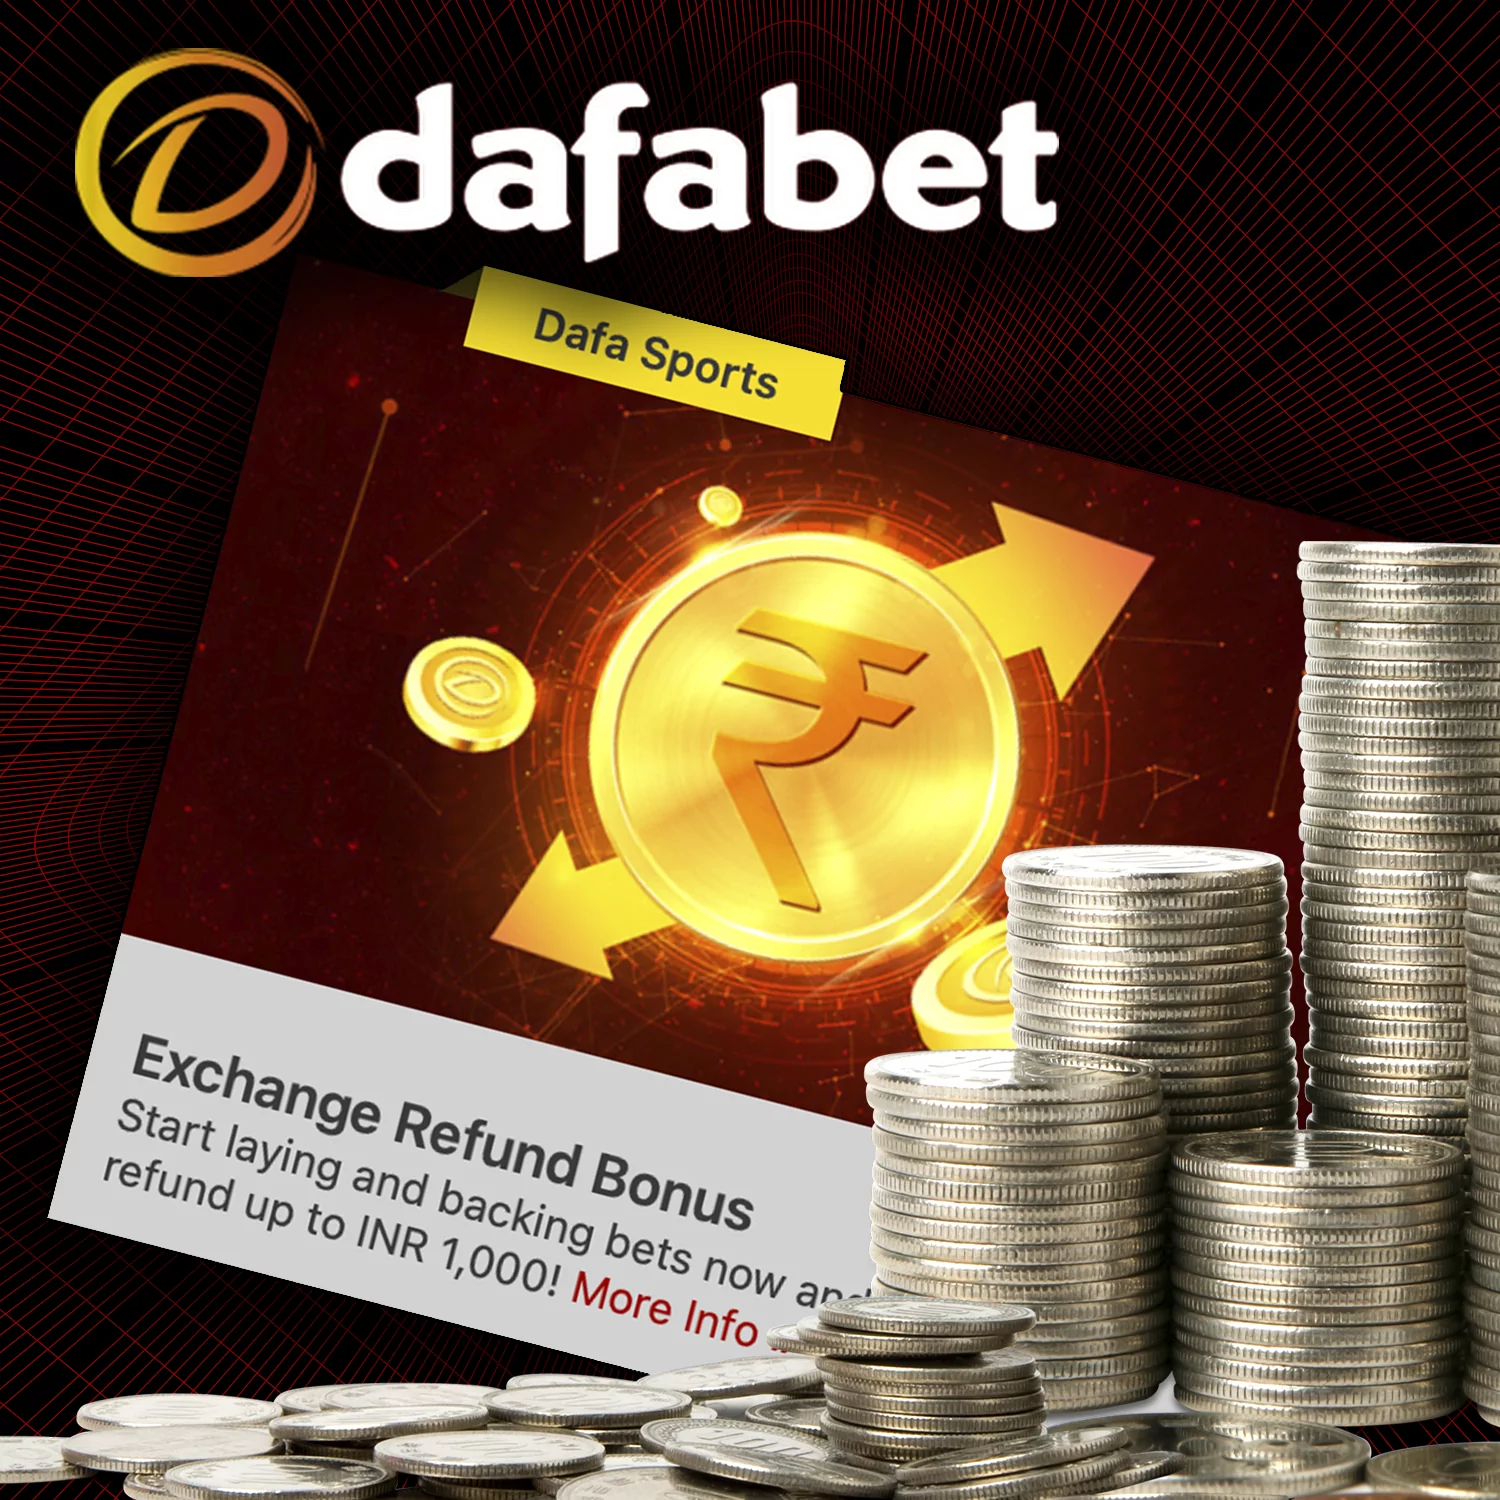 Dafabet offers refunds of up to INR 1,000.